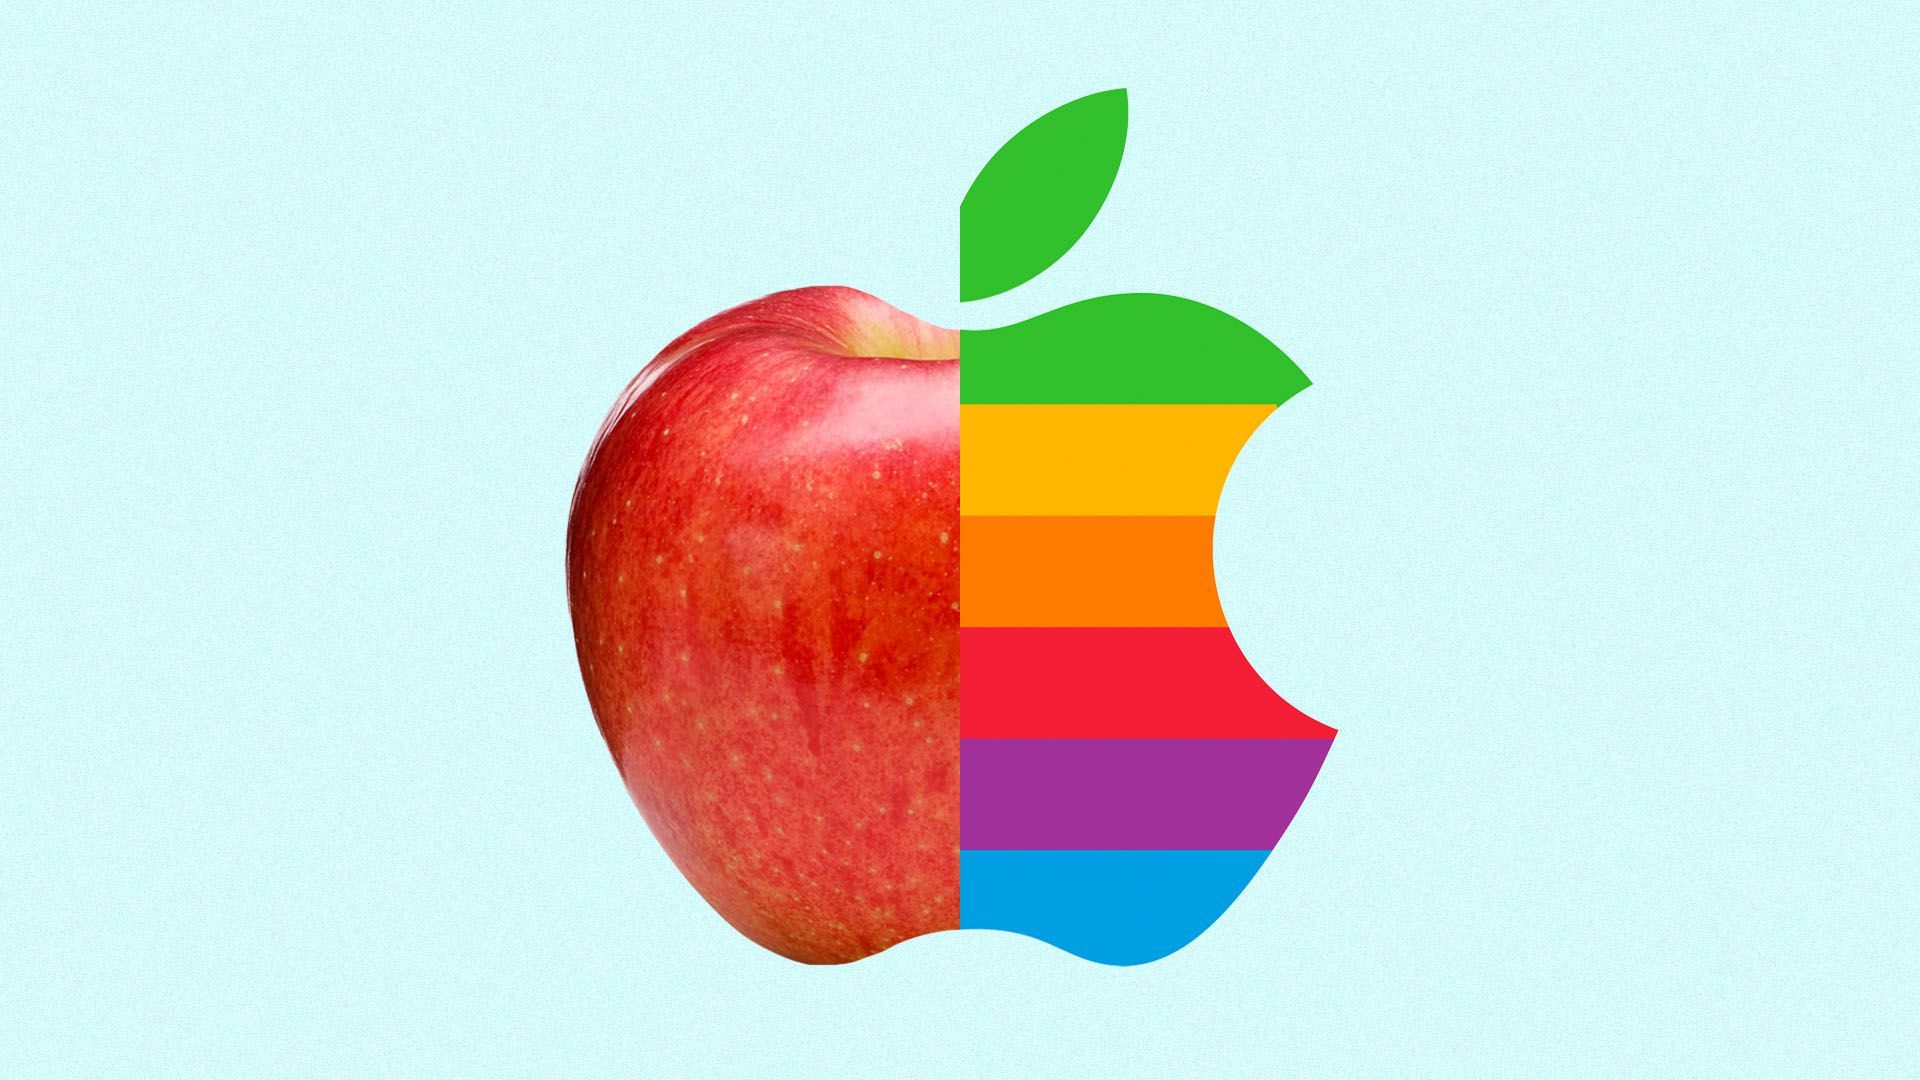 Illustration of a real apple split with the apple logo